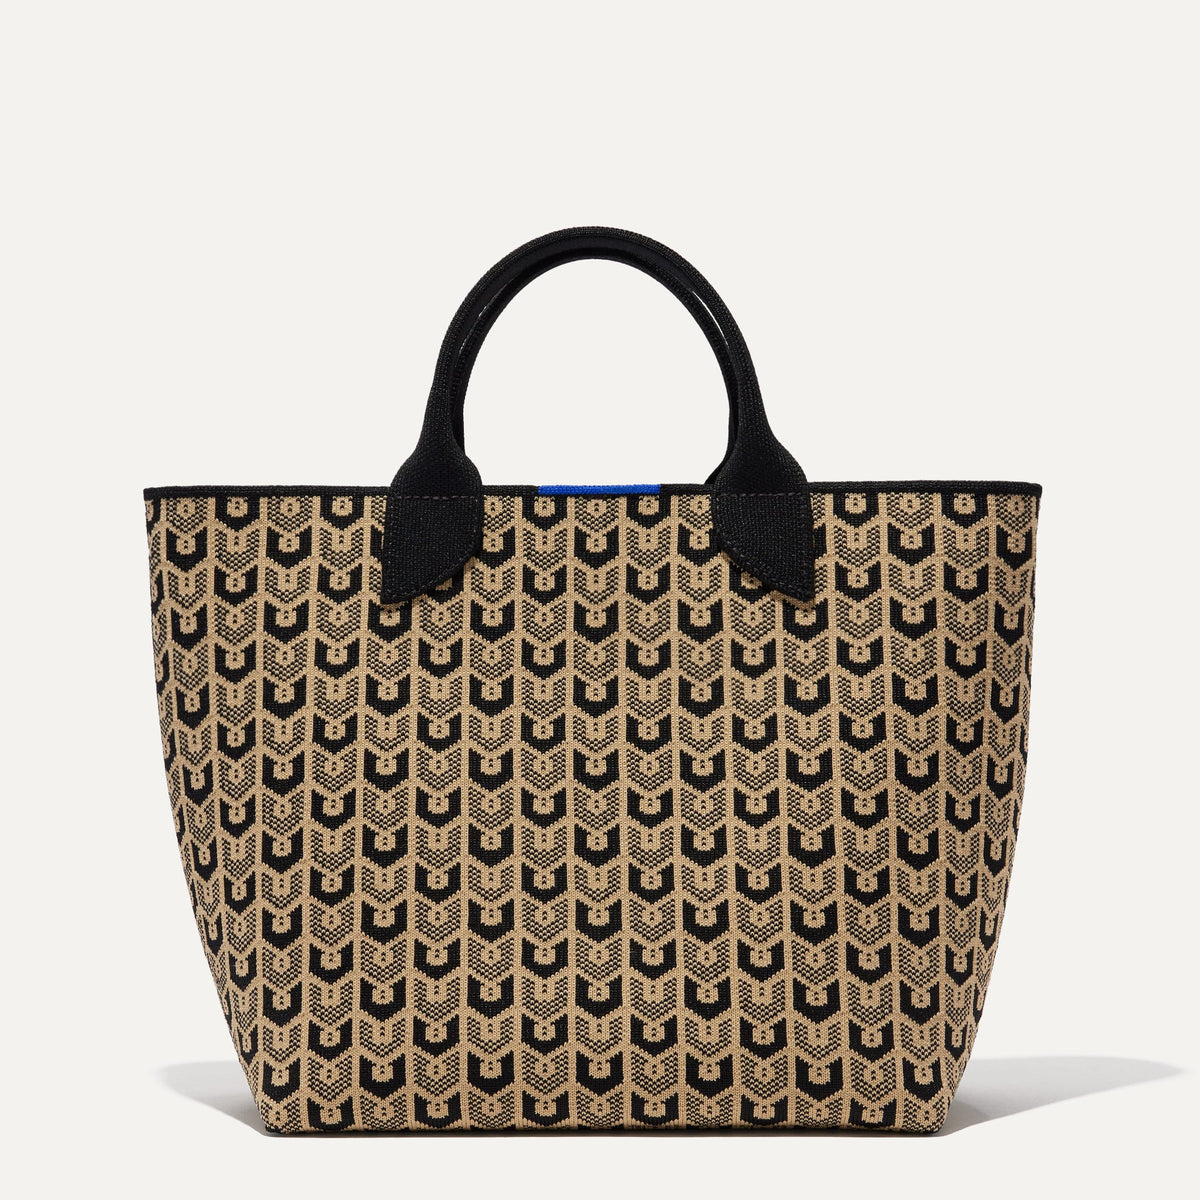 Rothy's - The Lightweight Tote in Brown